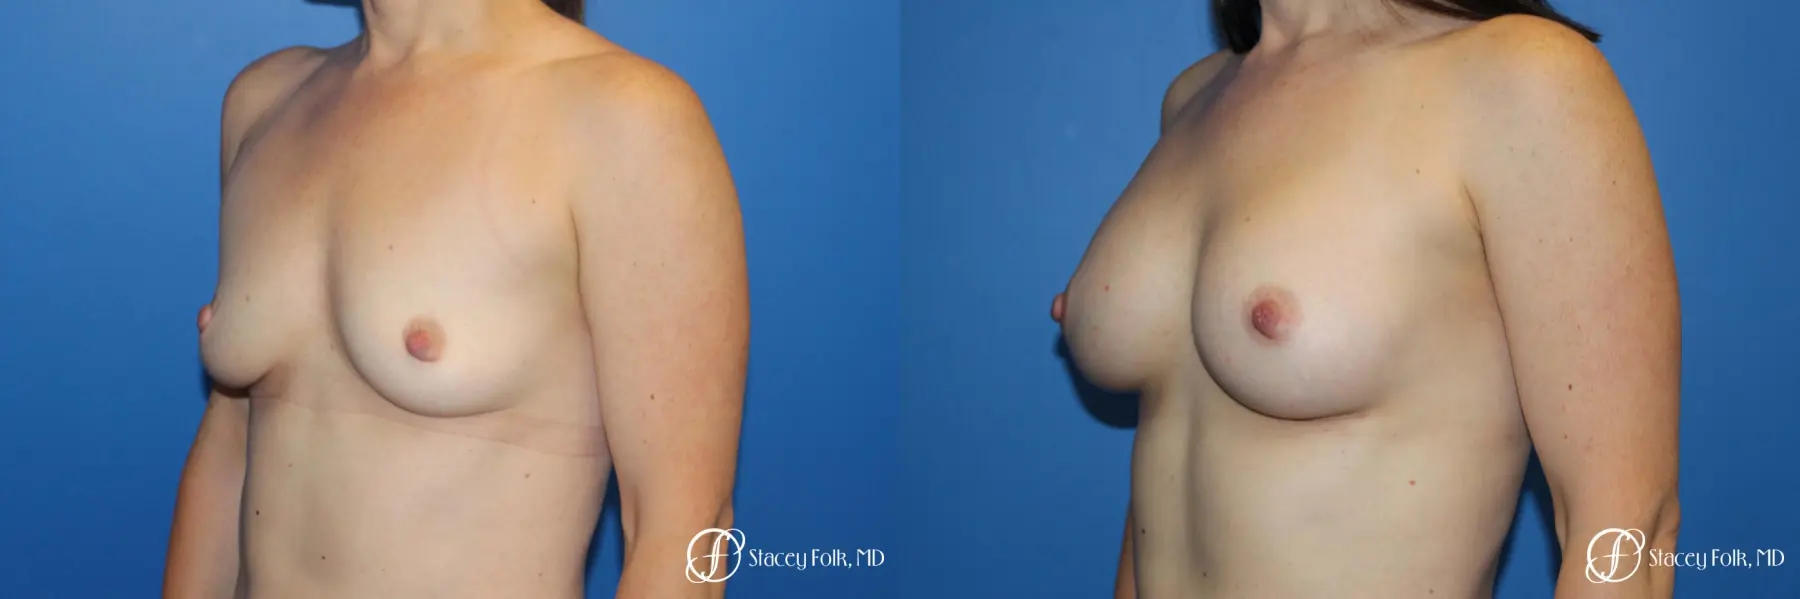 Breast augmentation with Natrelle Inspira breast implants - Before and After 4